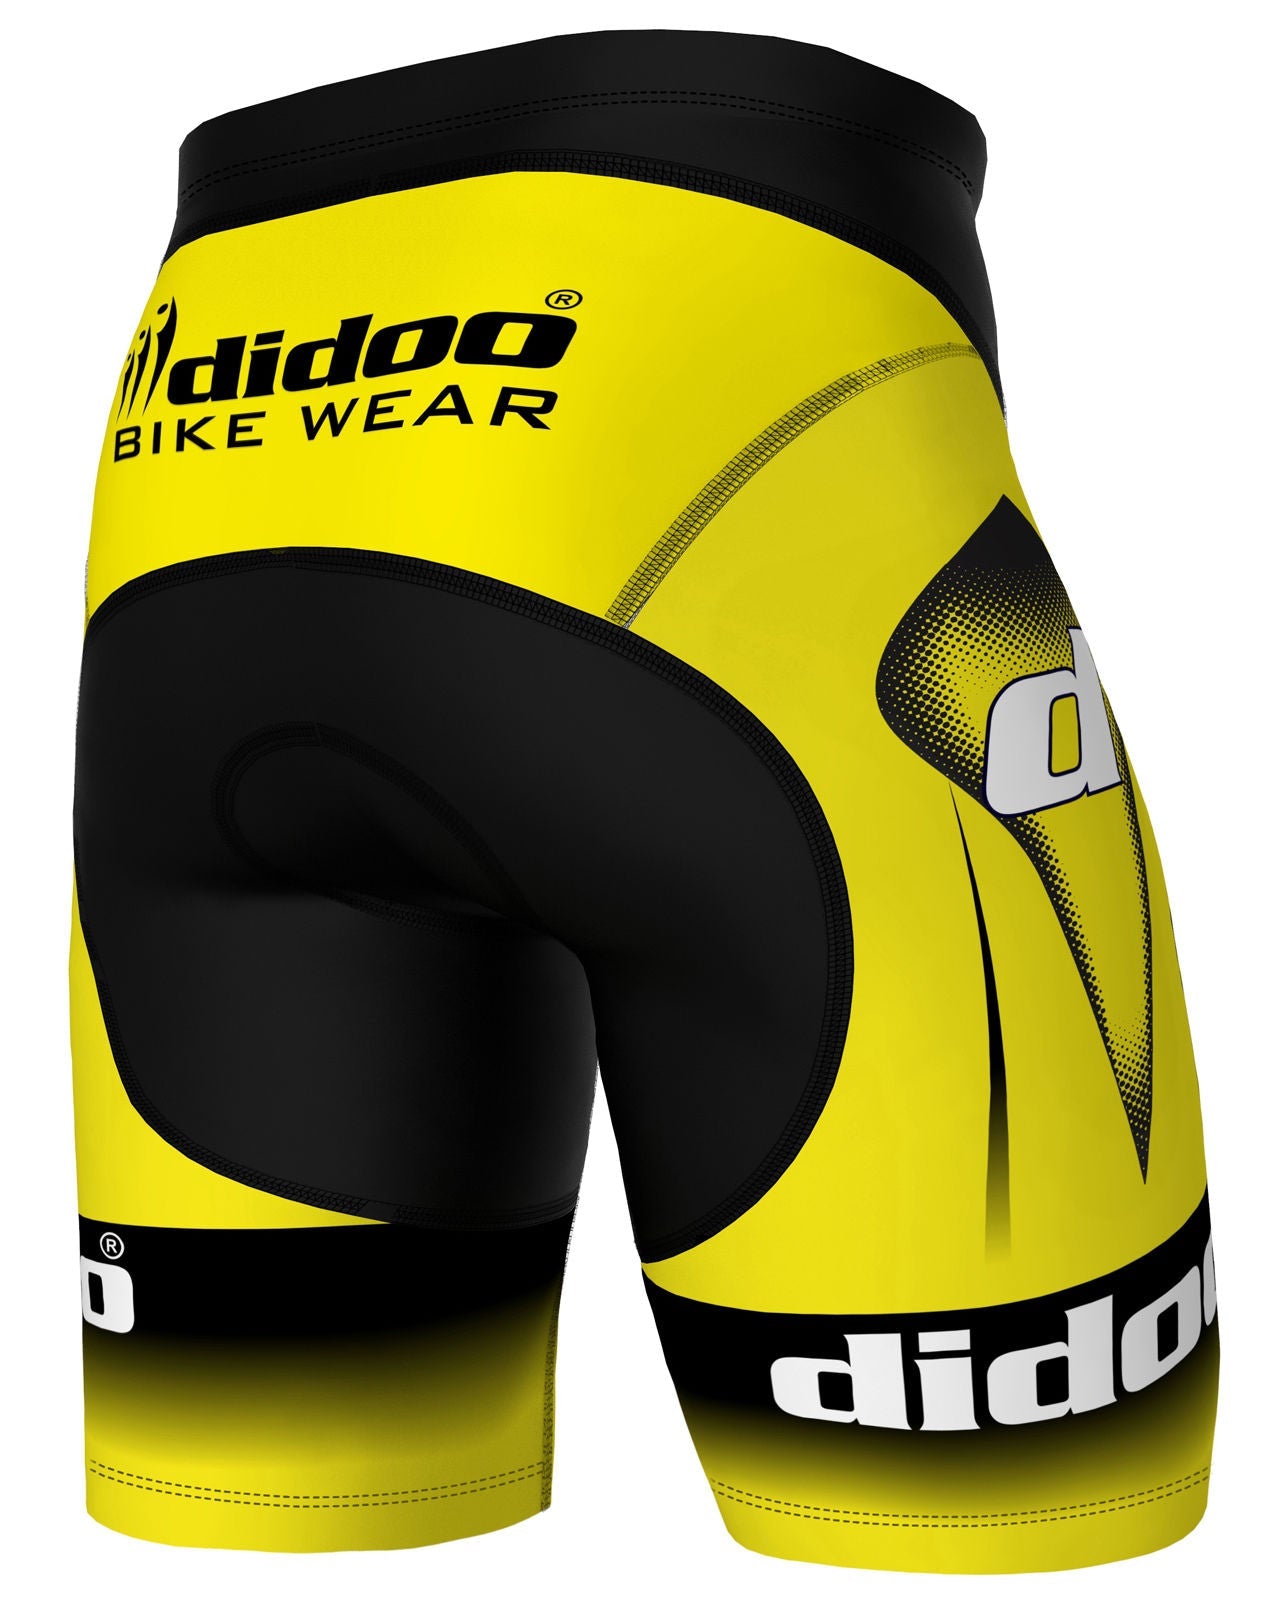 Back of Yellow and Black Padded Cycling Shorts